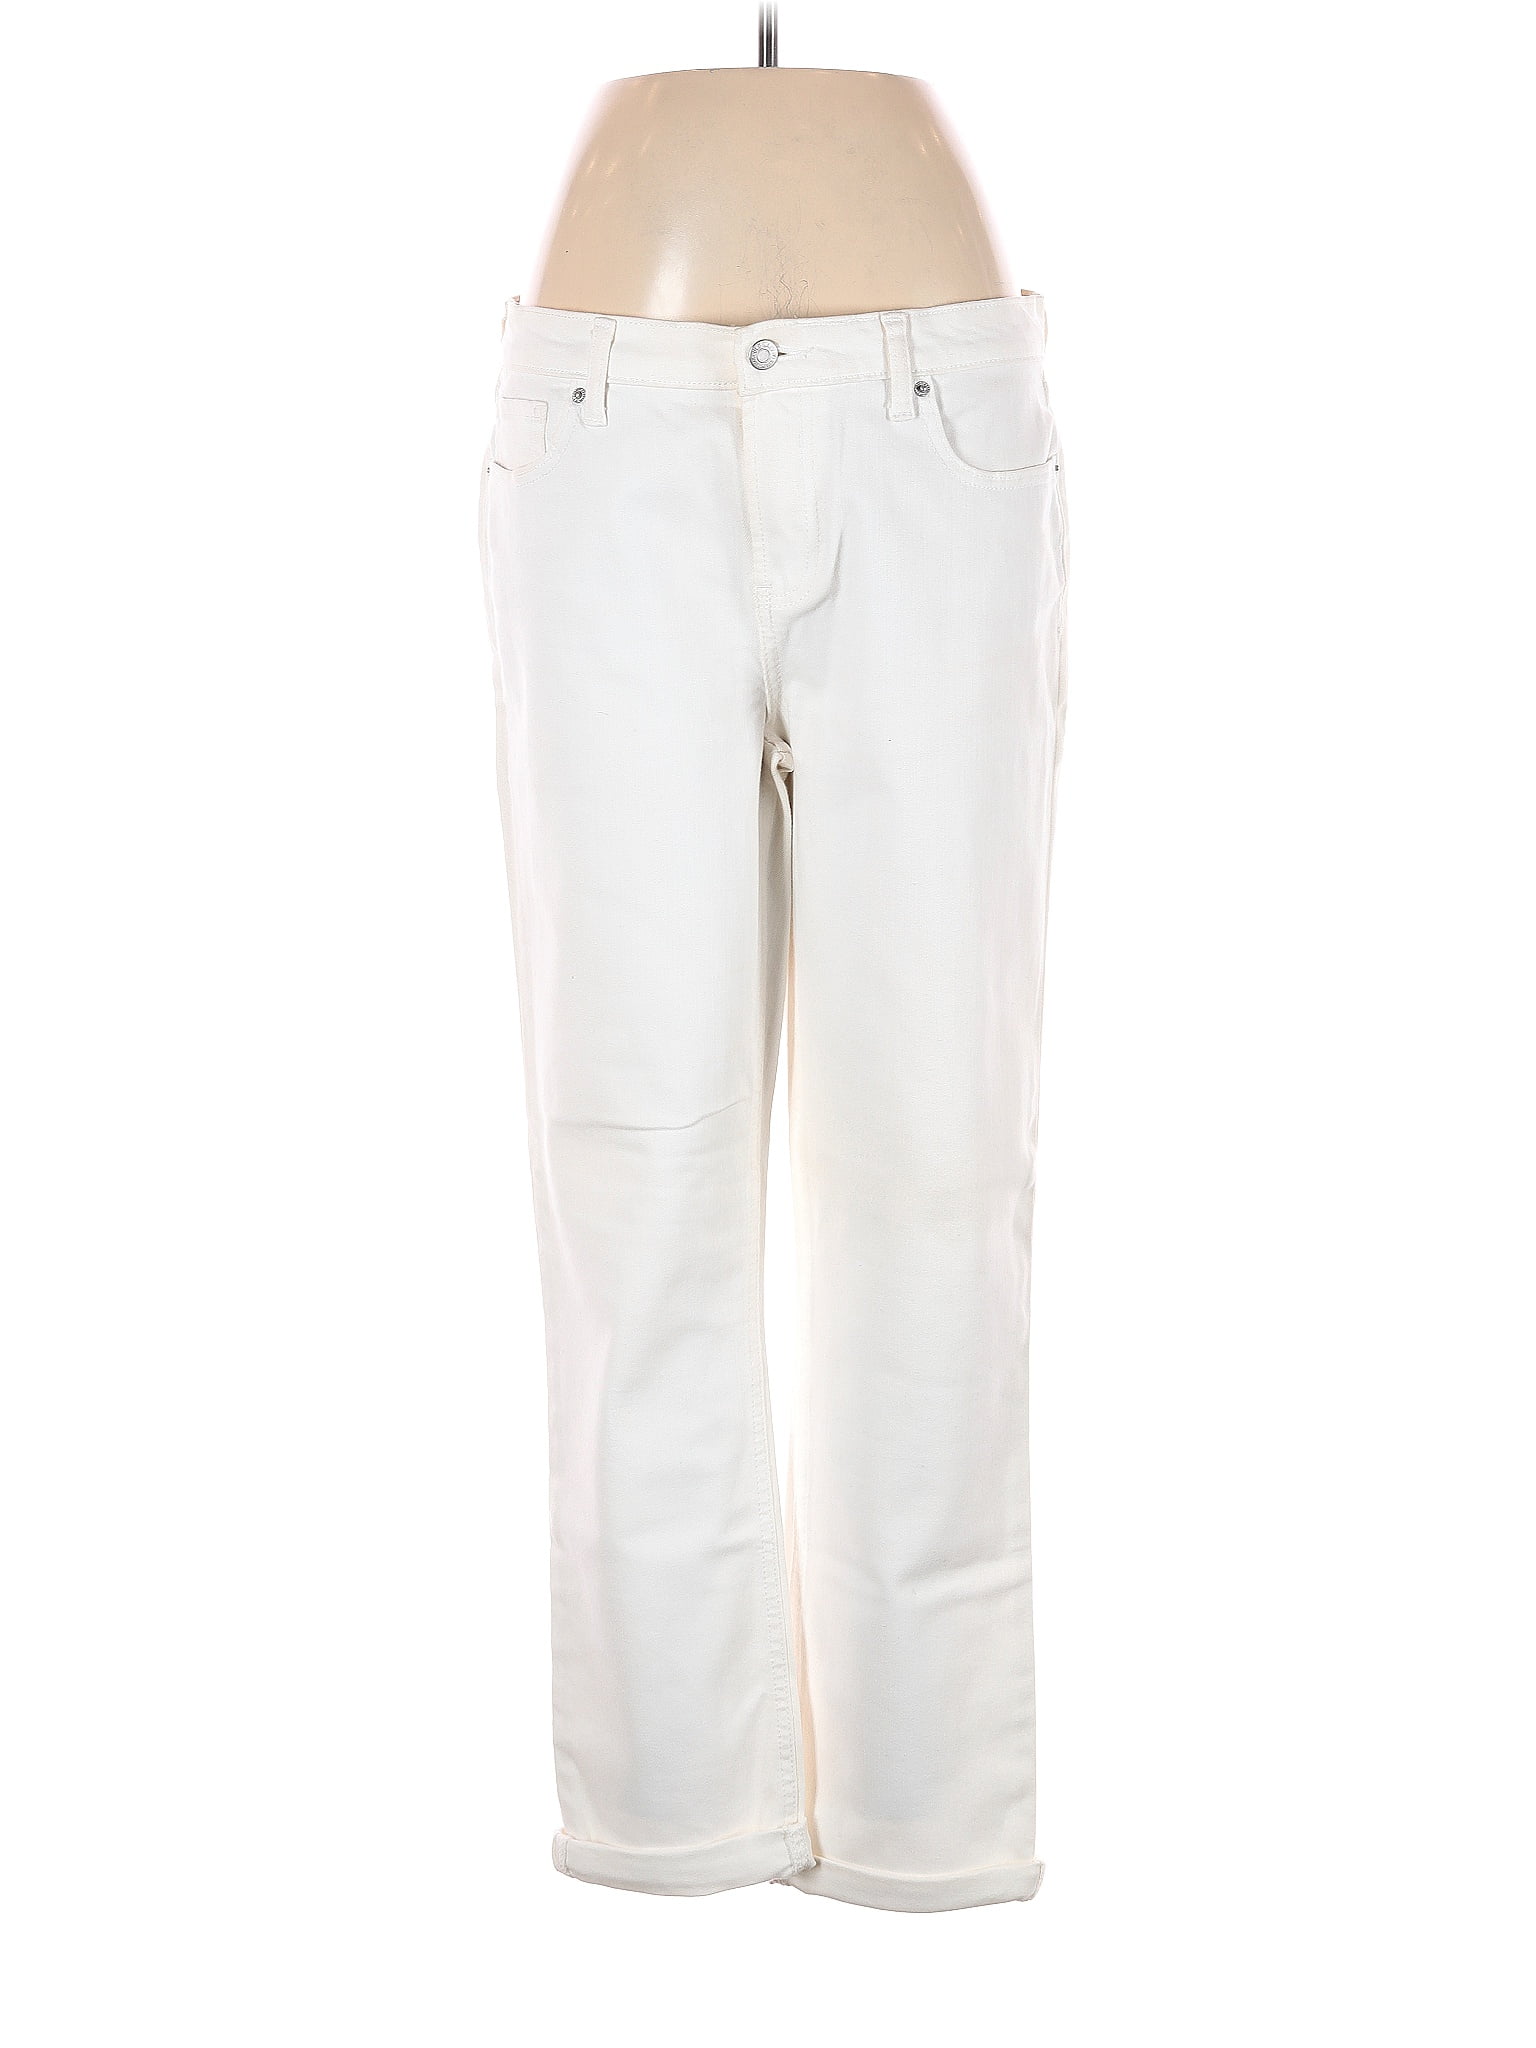 Old Navy Solid White Ivory Jeans Size 8 - 58% off | ThredUp